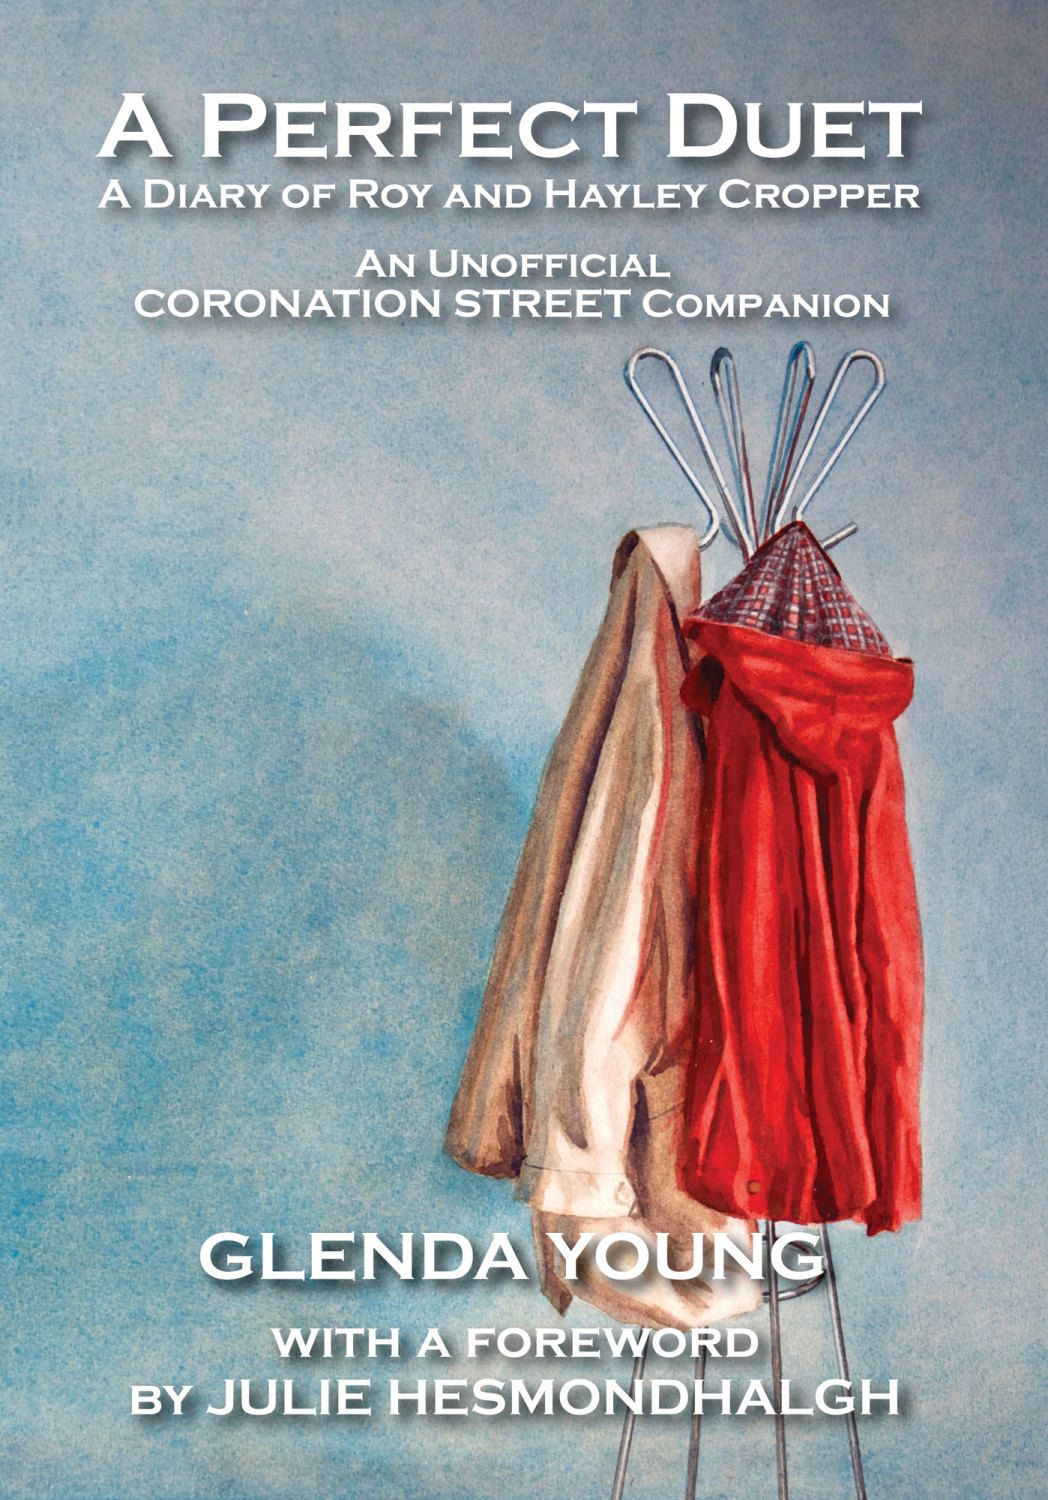 A Perfect Duet. The Diary of Roy and Hayley Cropper. By Glenda Young